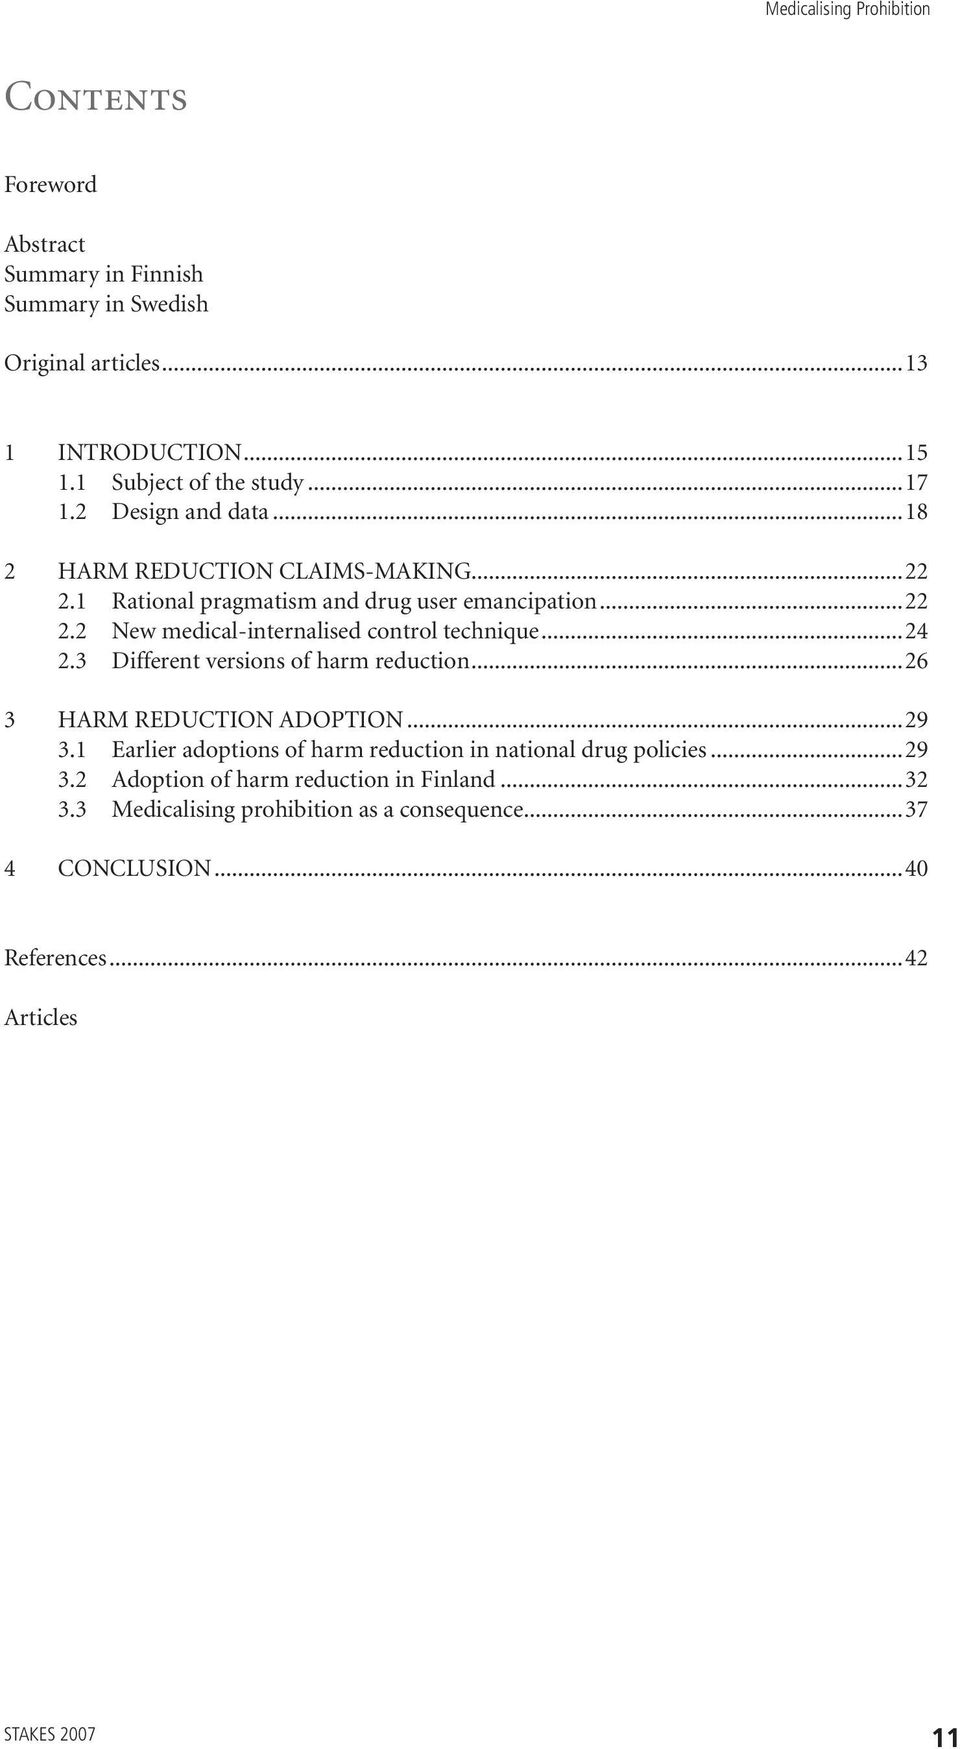 ..24 2.3 Different versions of harm reduction...26 3 Harm reduction adoption...29 3.1 Earlier adoptions of harm reduction in national drug policies...29 3.2 Adoption of harm reduction in Finland.